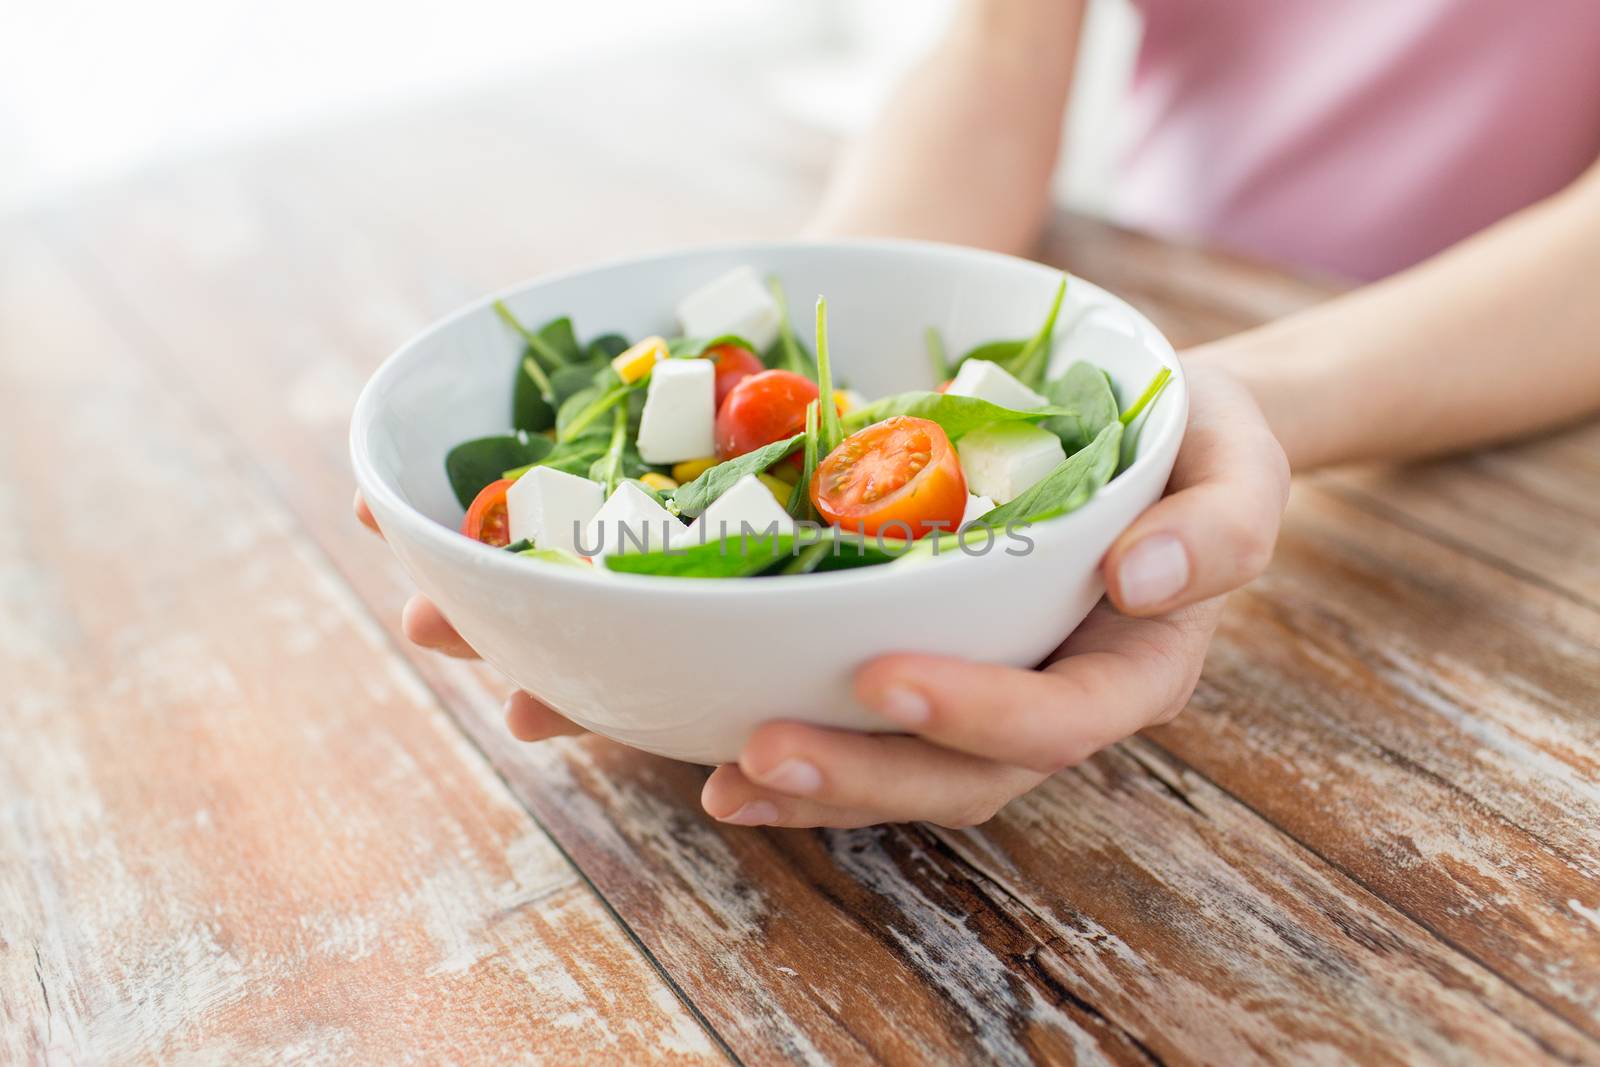 healthy eating, dieting and people concept - close up of young woman hands showing salad bowl at home